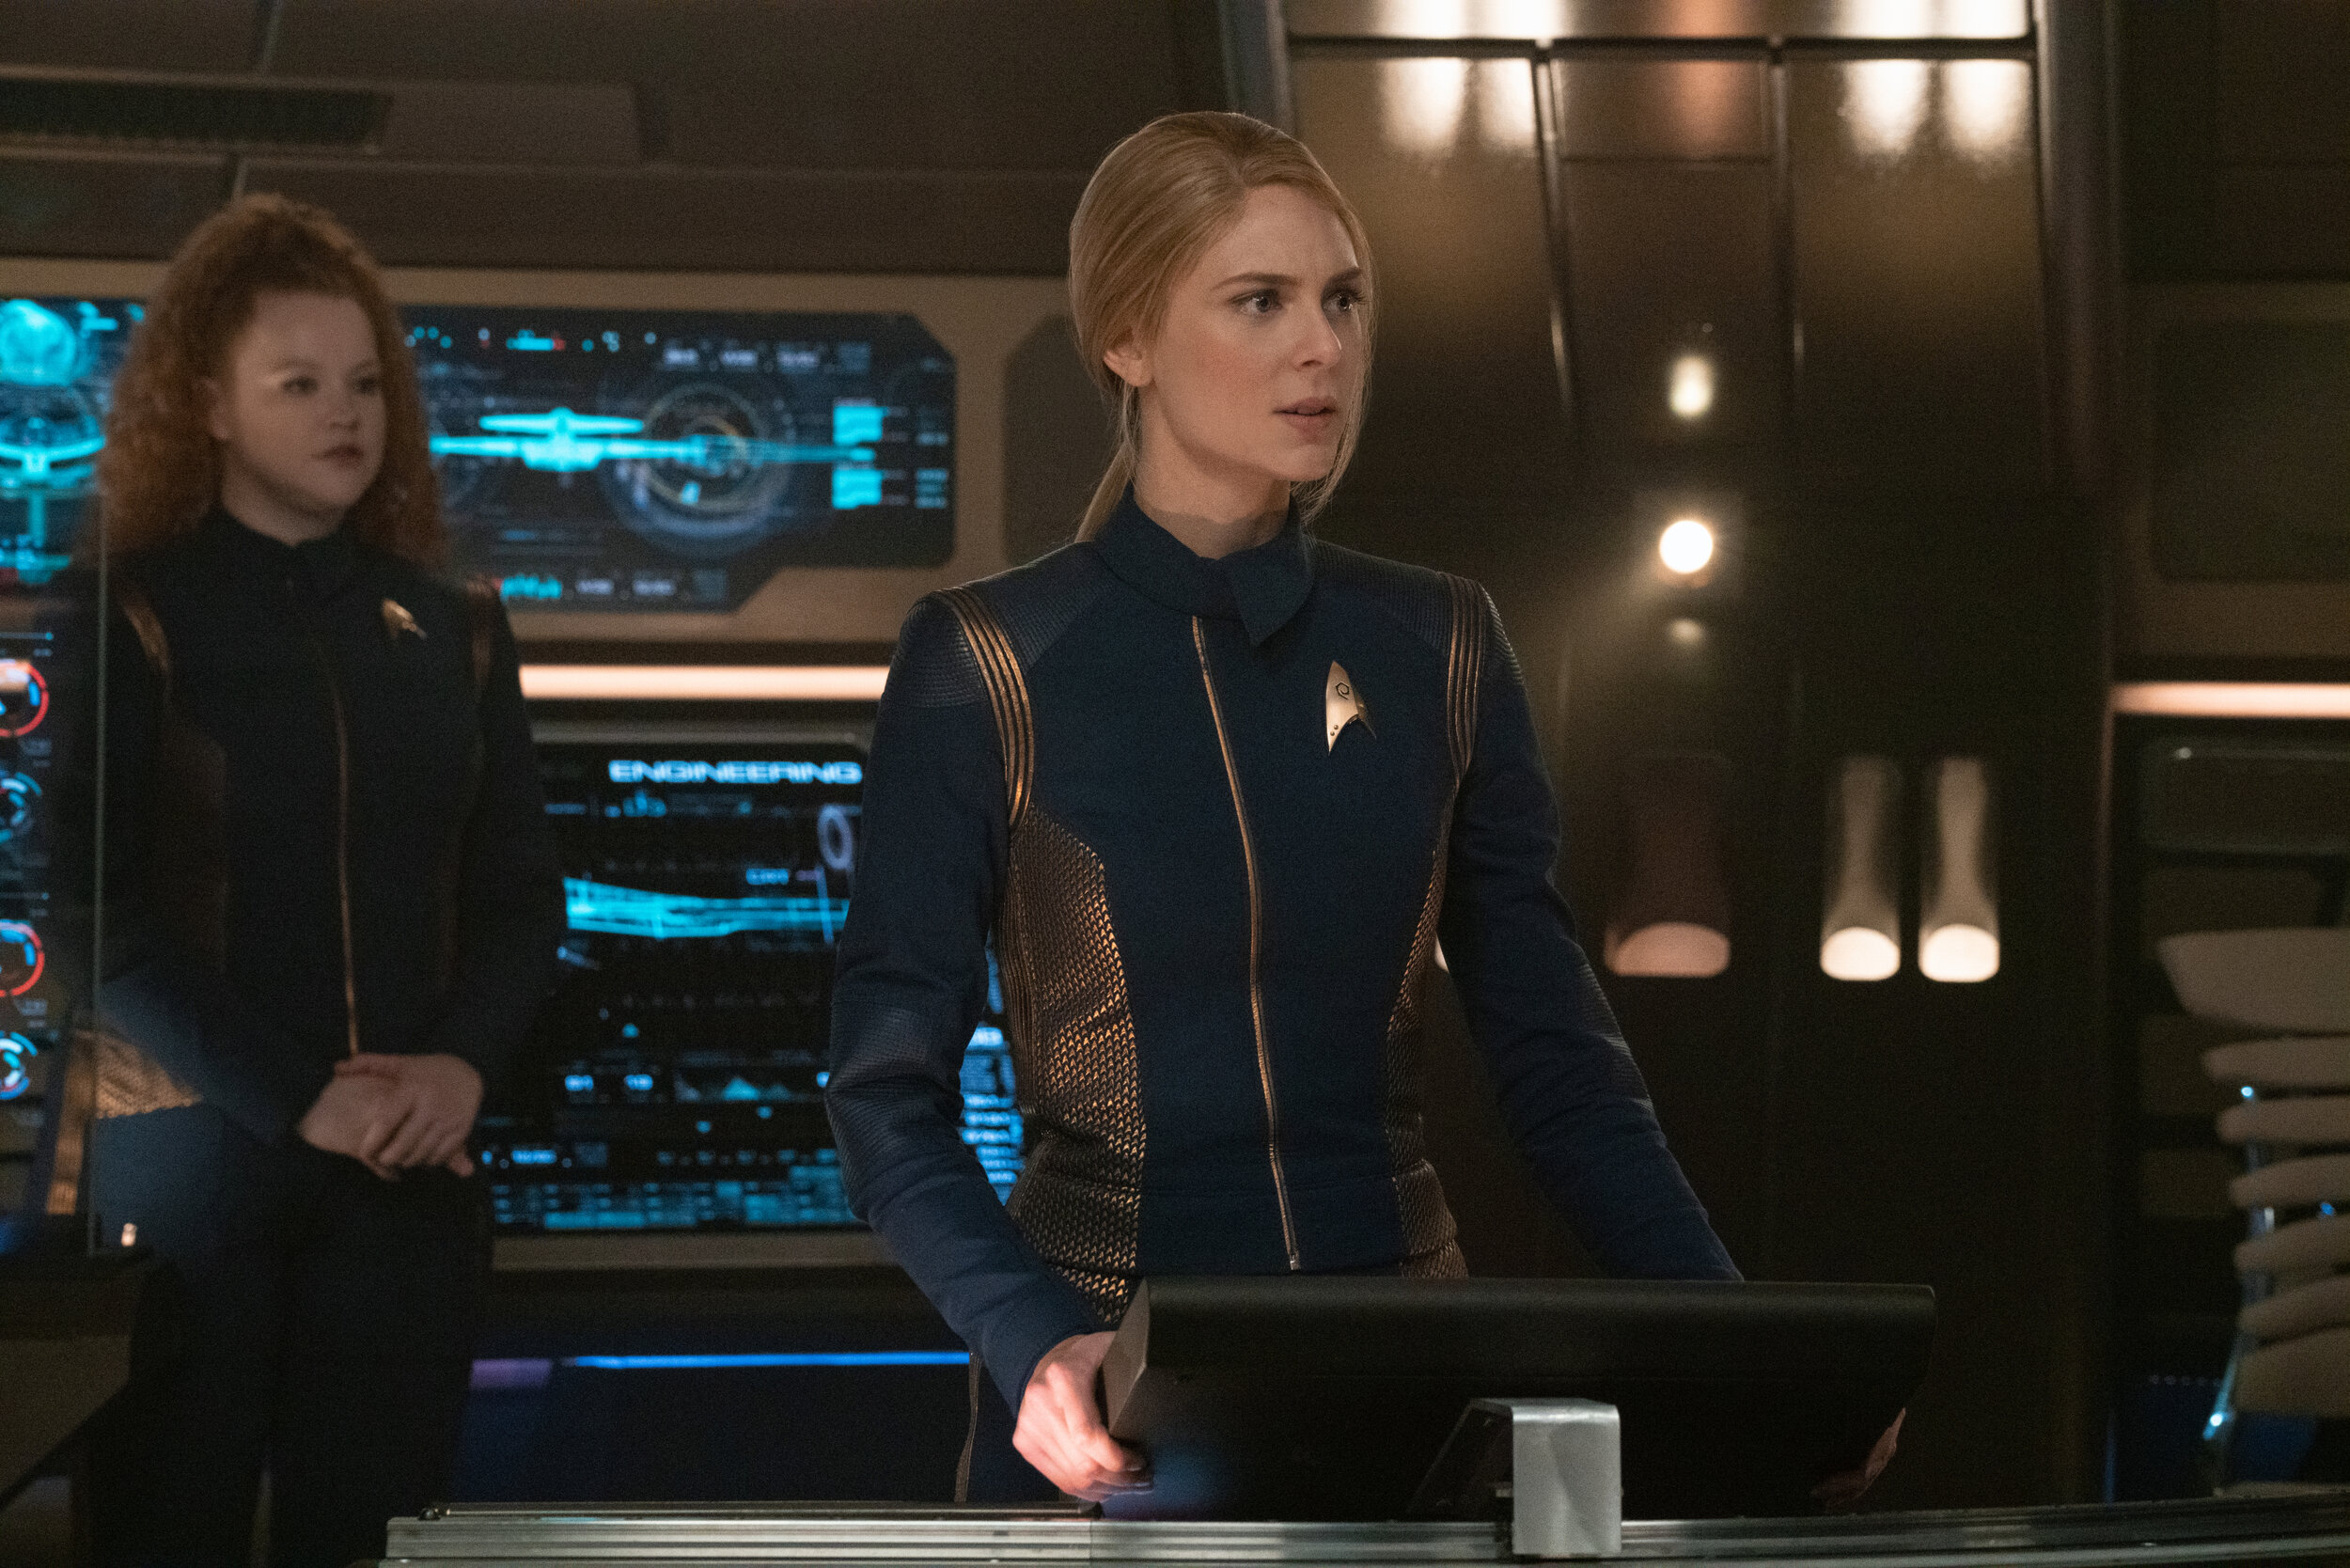   "Die Trying" -- Ep#305 -- Pictured: Mary Wiseman as Tilly and Sara Mitich as Lt. Nilsson of the CBS All Access series STAR TREK: DISCOVERY. Photo Cr: Michael Gibson/CBS ©2020 CBS Interactive, Inc. All Rights Reserved.  